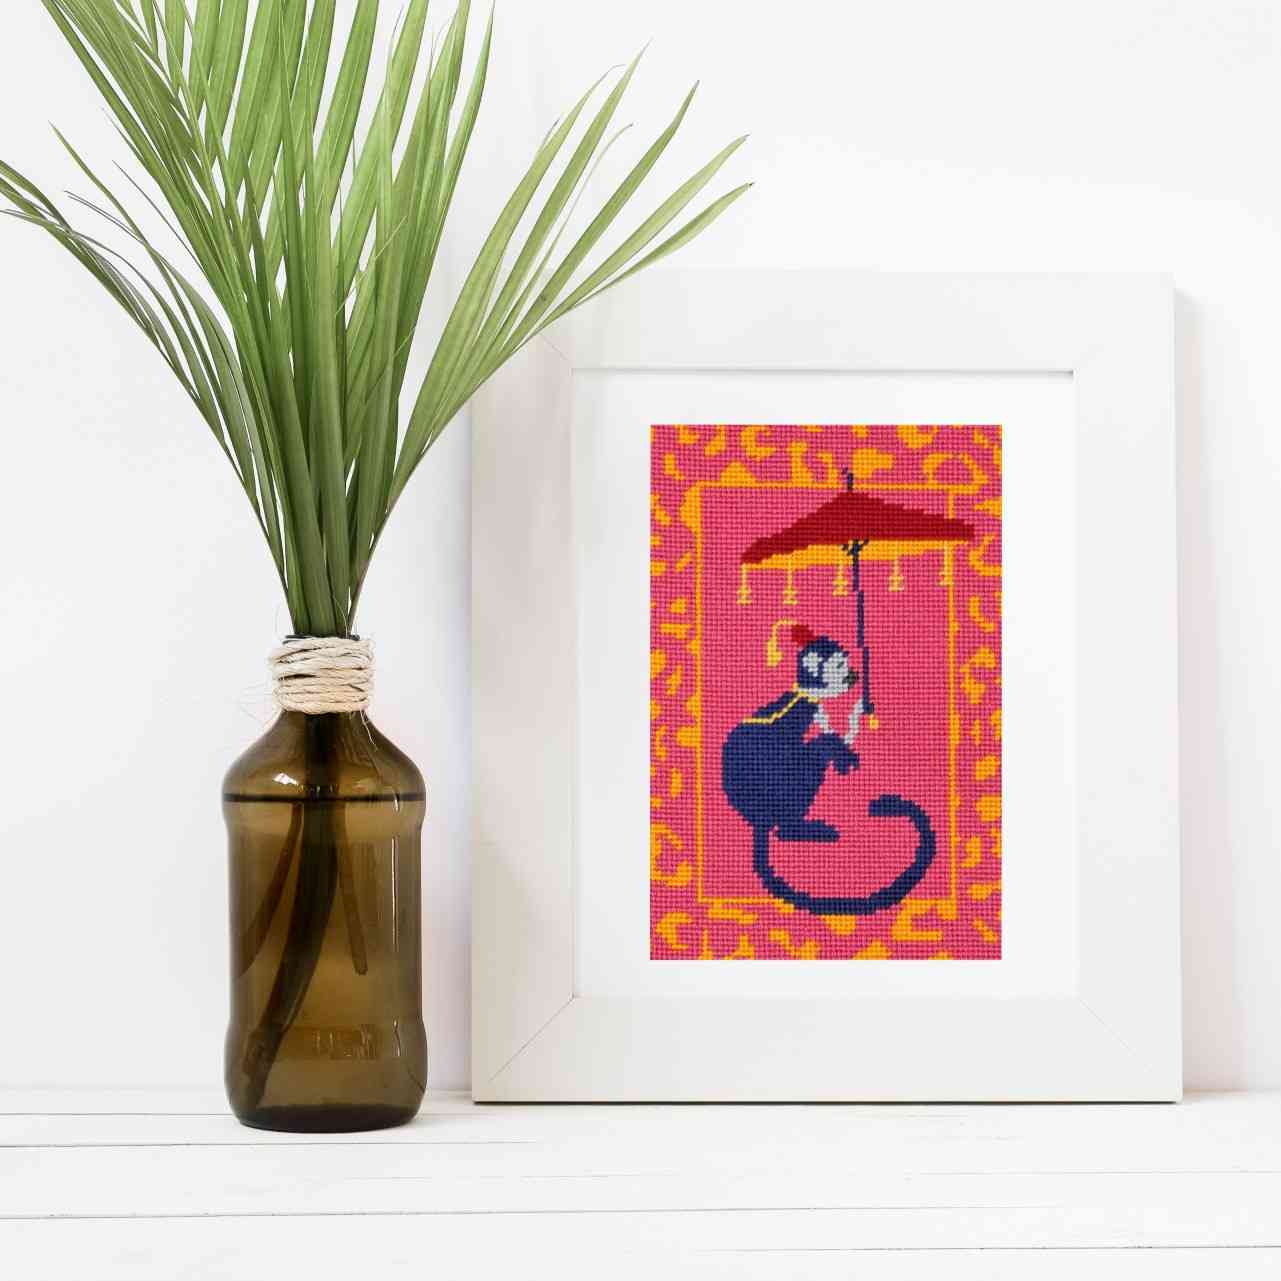 Chinoiserie Monkey needlepoint kit with silk threads shown in a white frame lifestyle image.